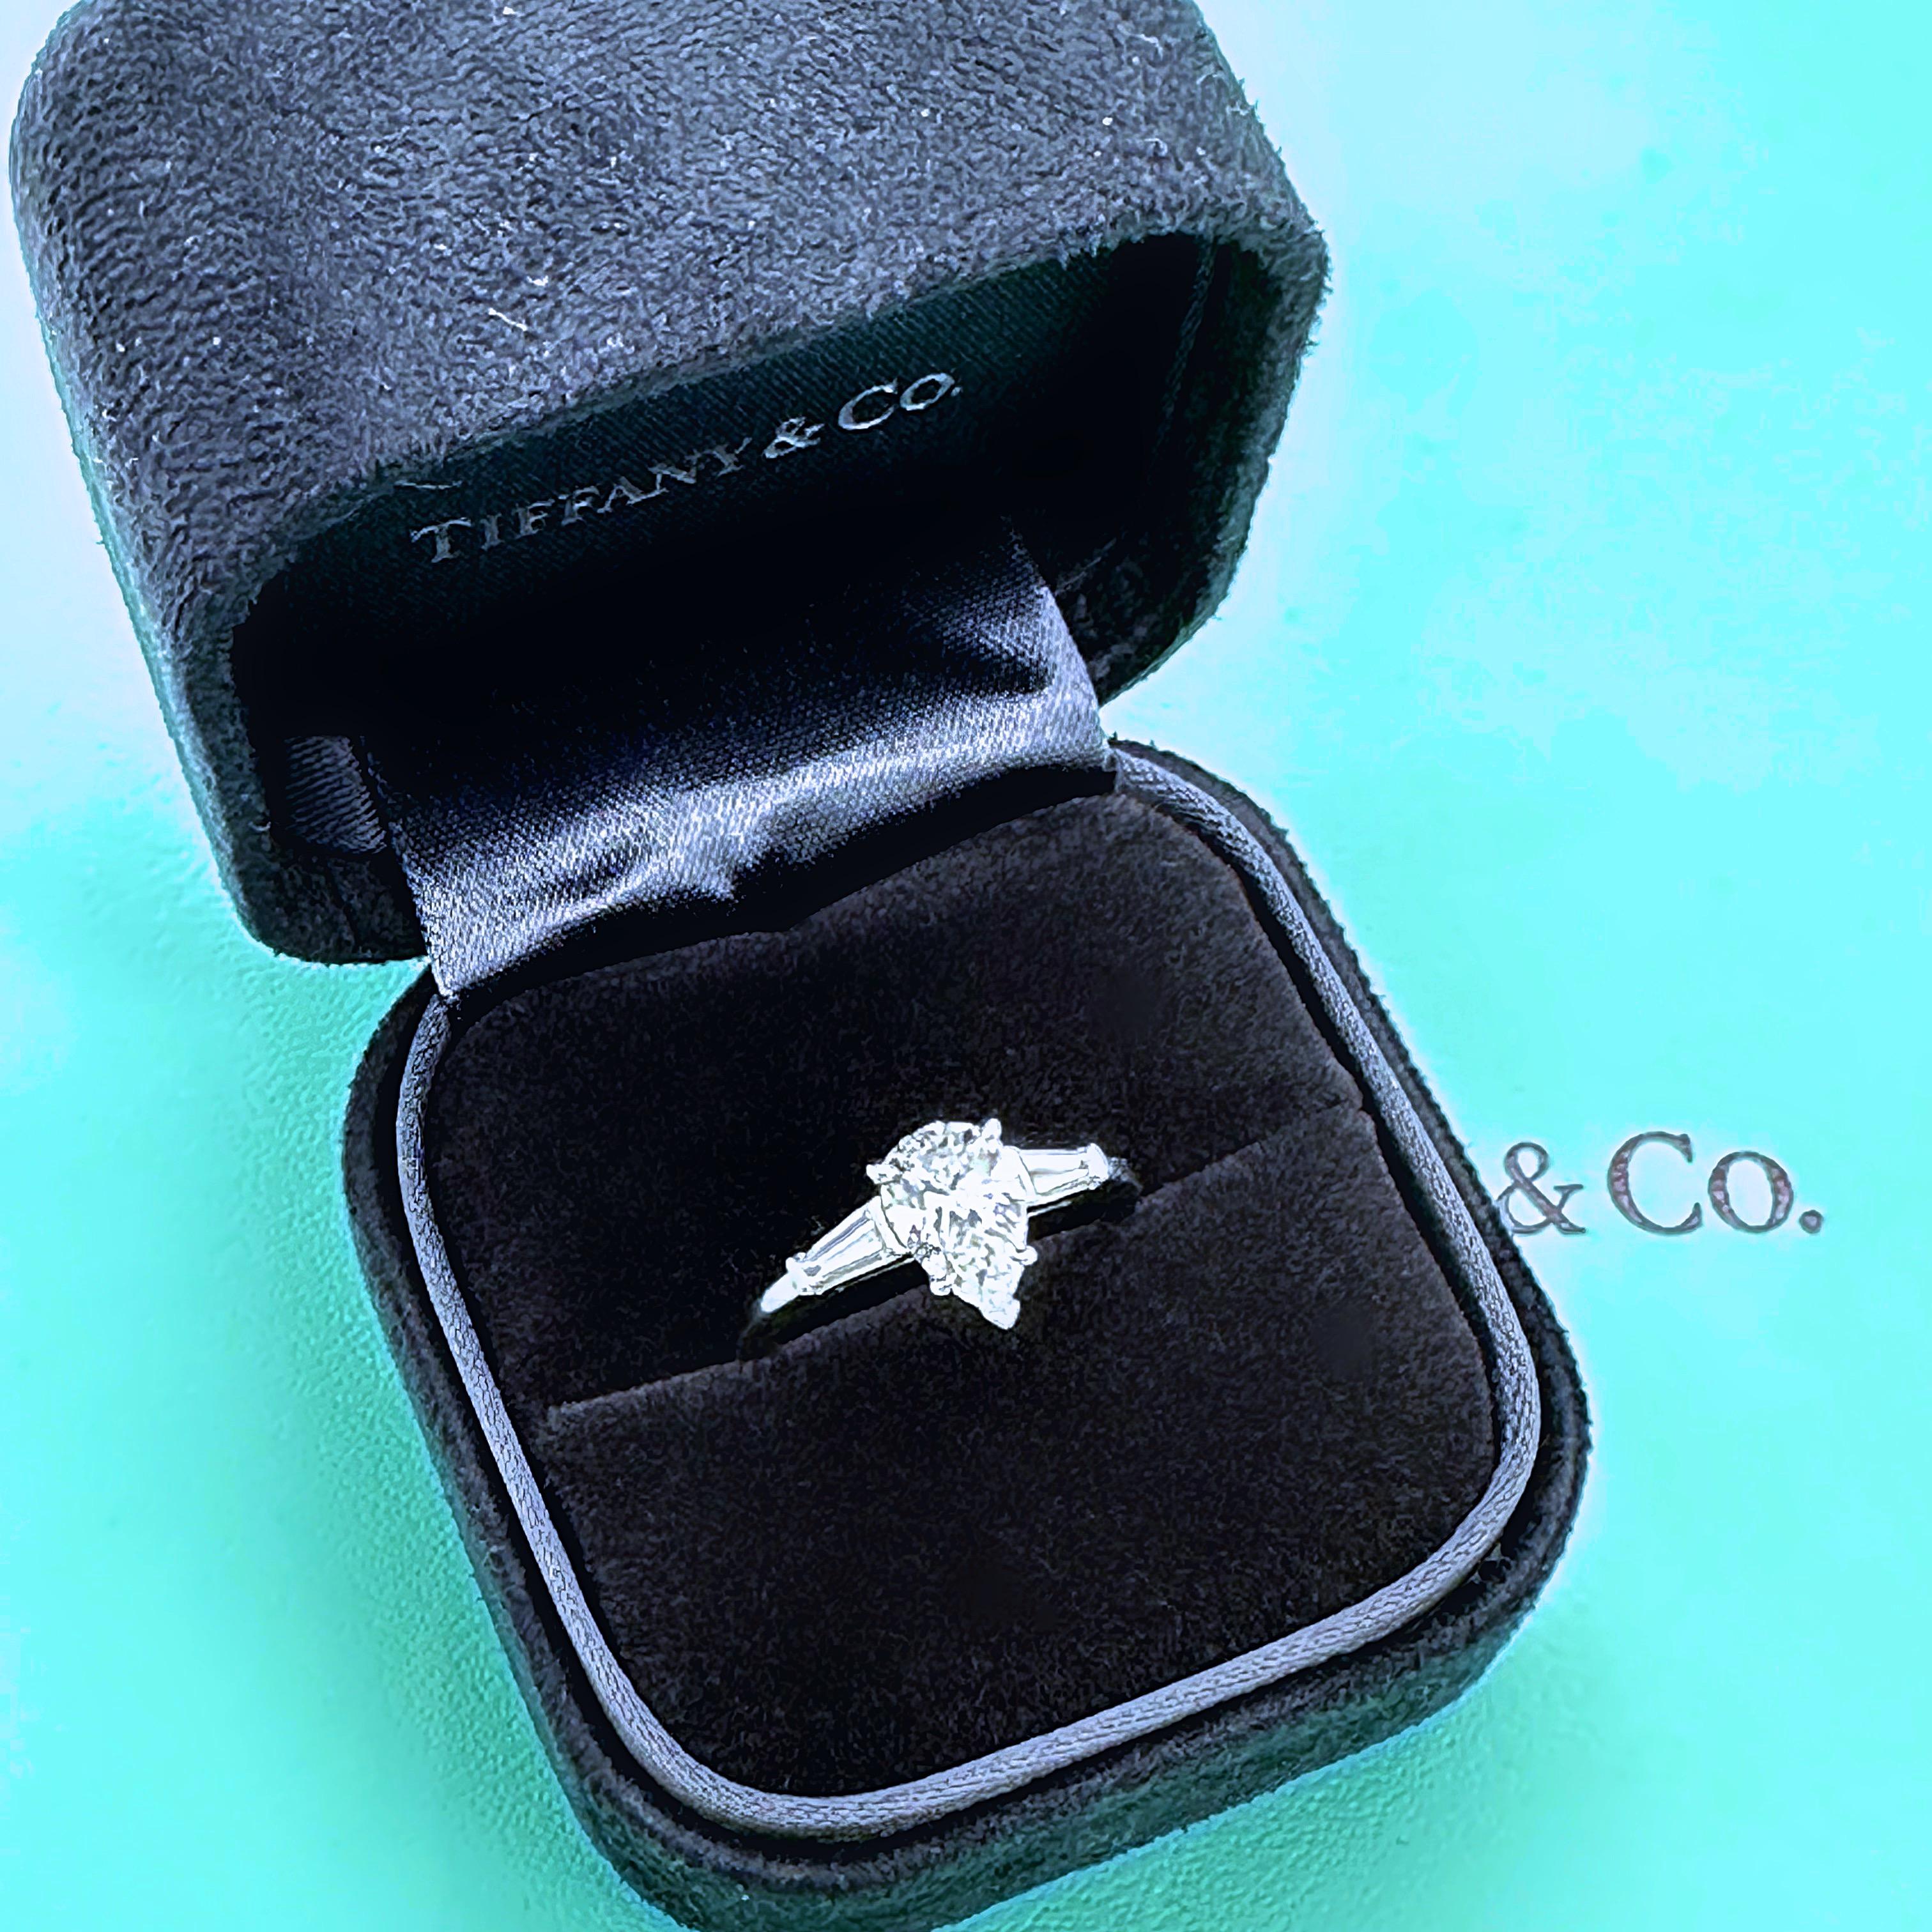 Tiffany & Co. Pear Diamond 1.07 D VS2 with Baguette Side Stones Engagement Ring For Sale 6